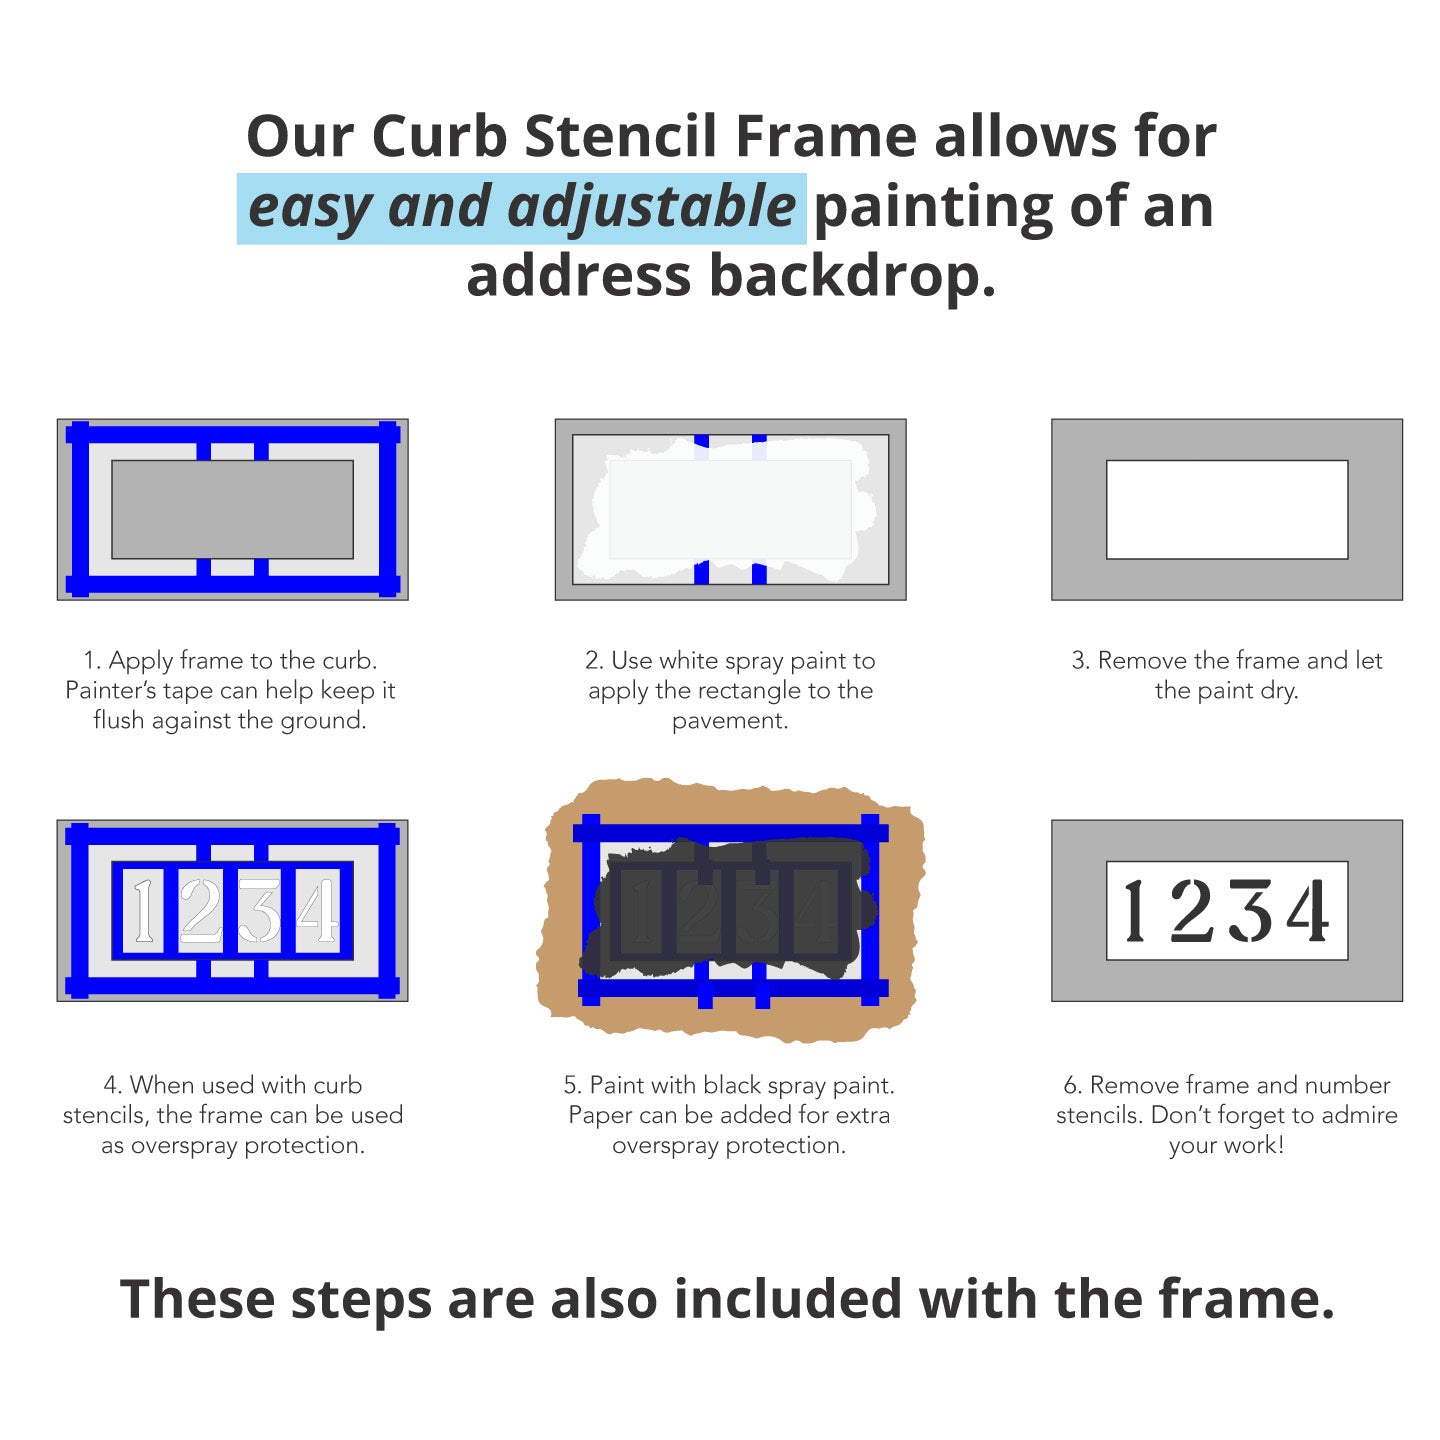 How to Use Curb Stencil Frame